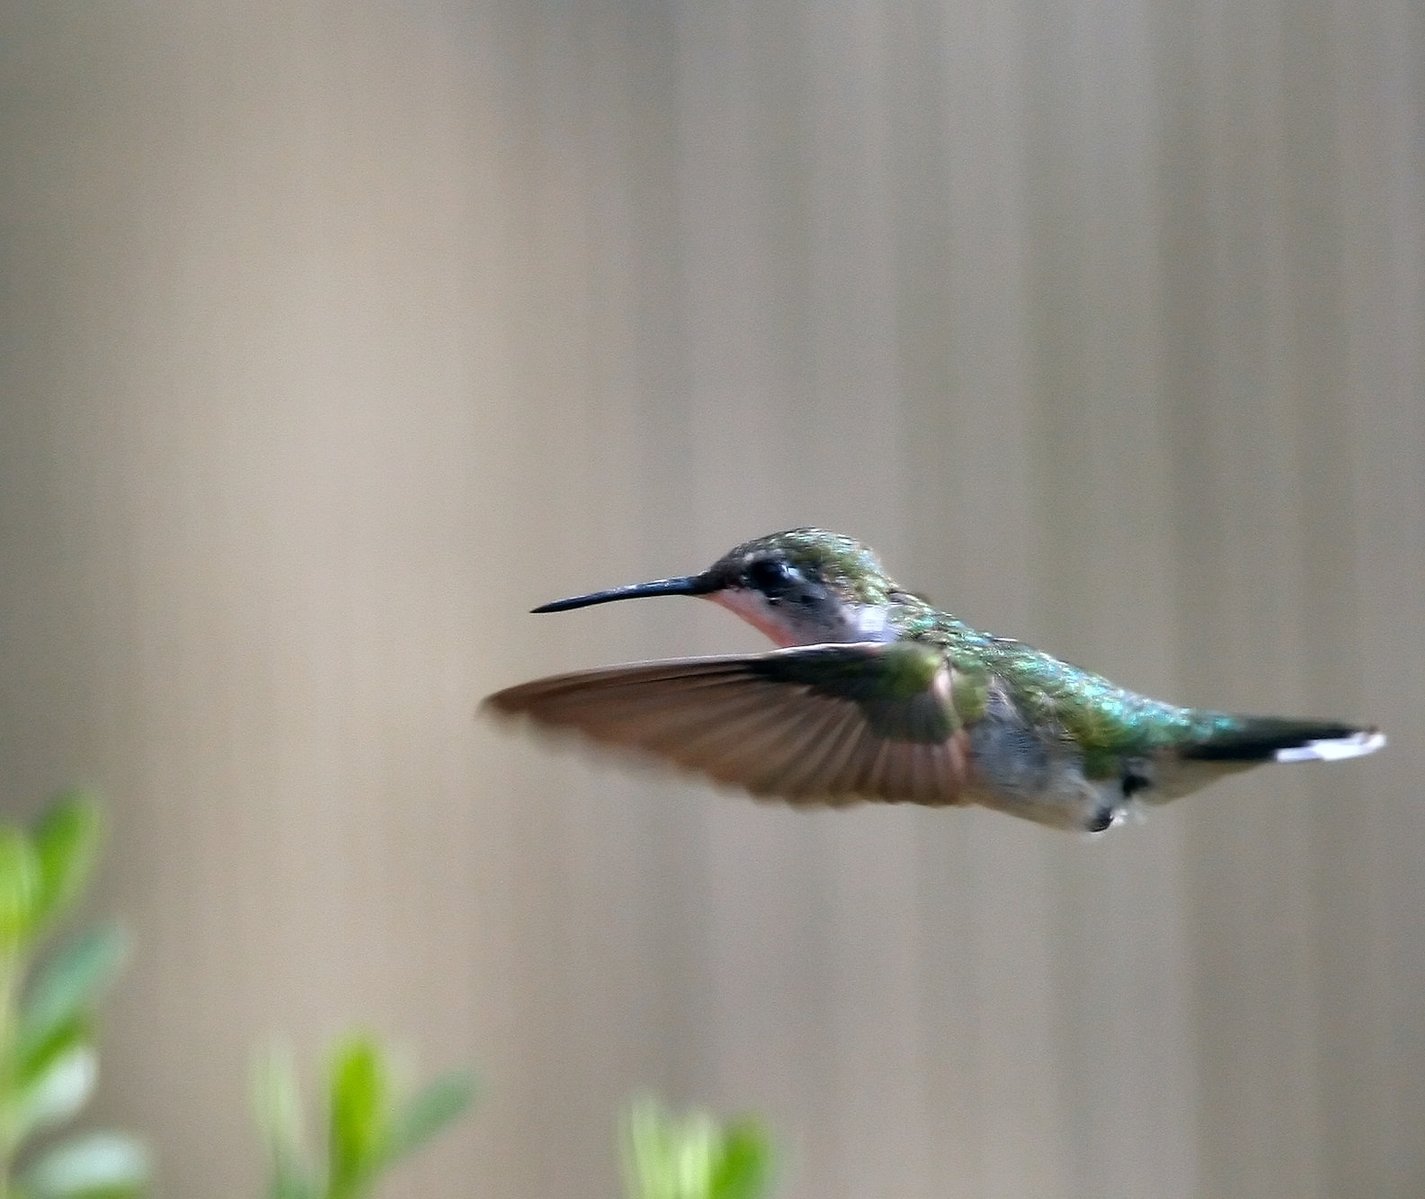 a humming bird flying past some green leaves